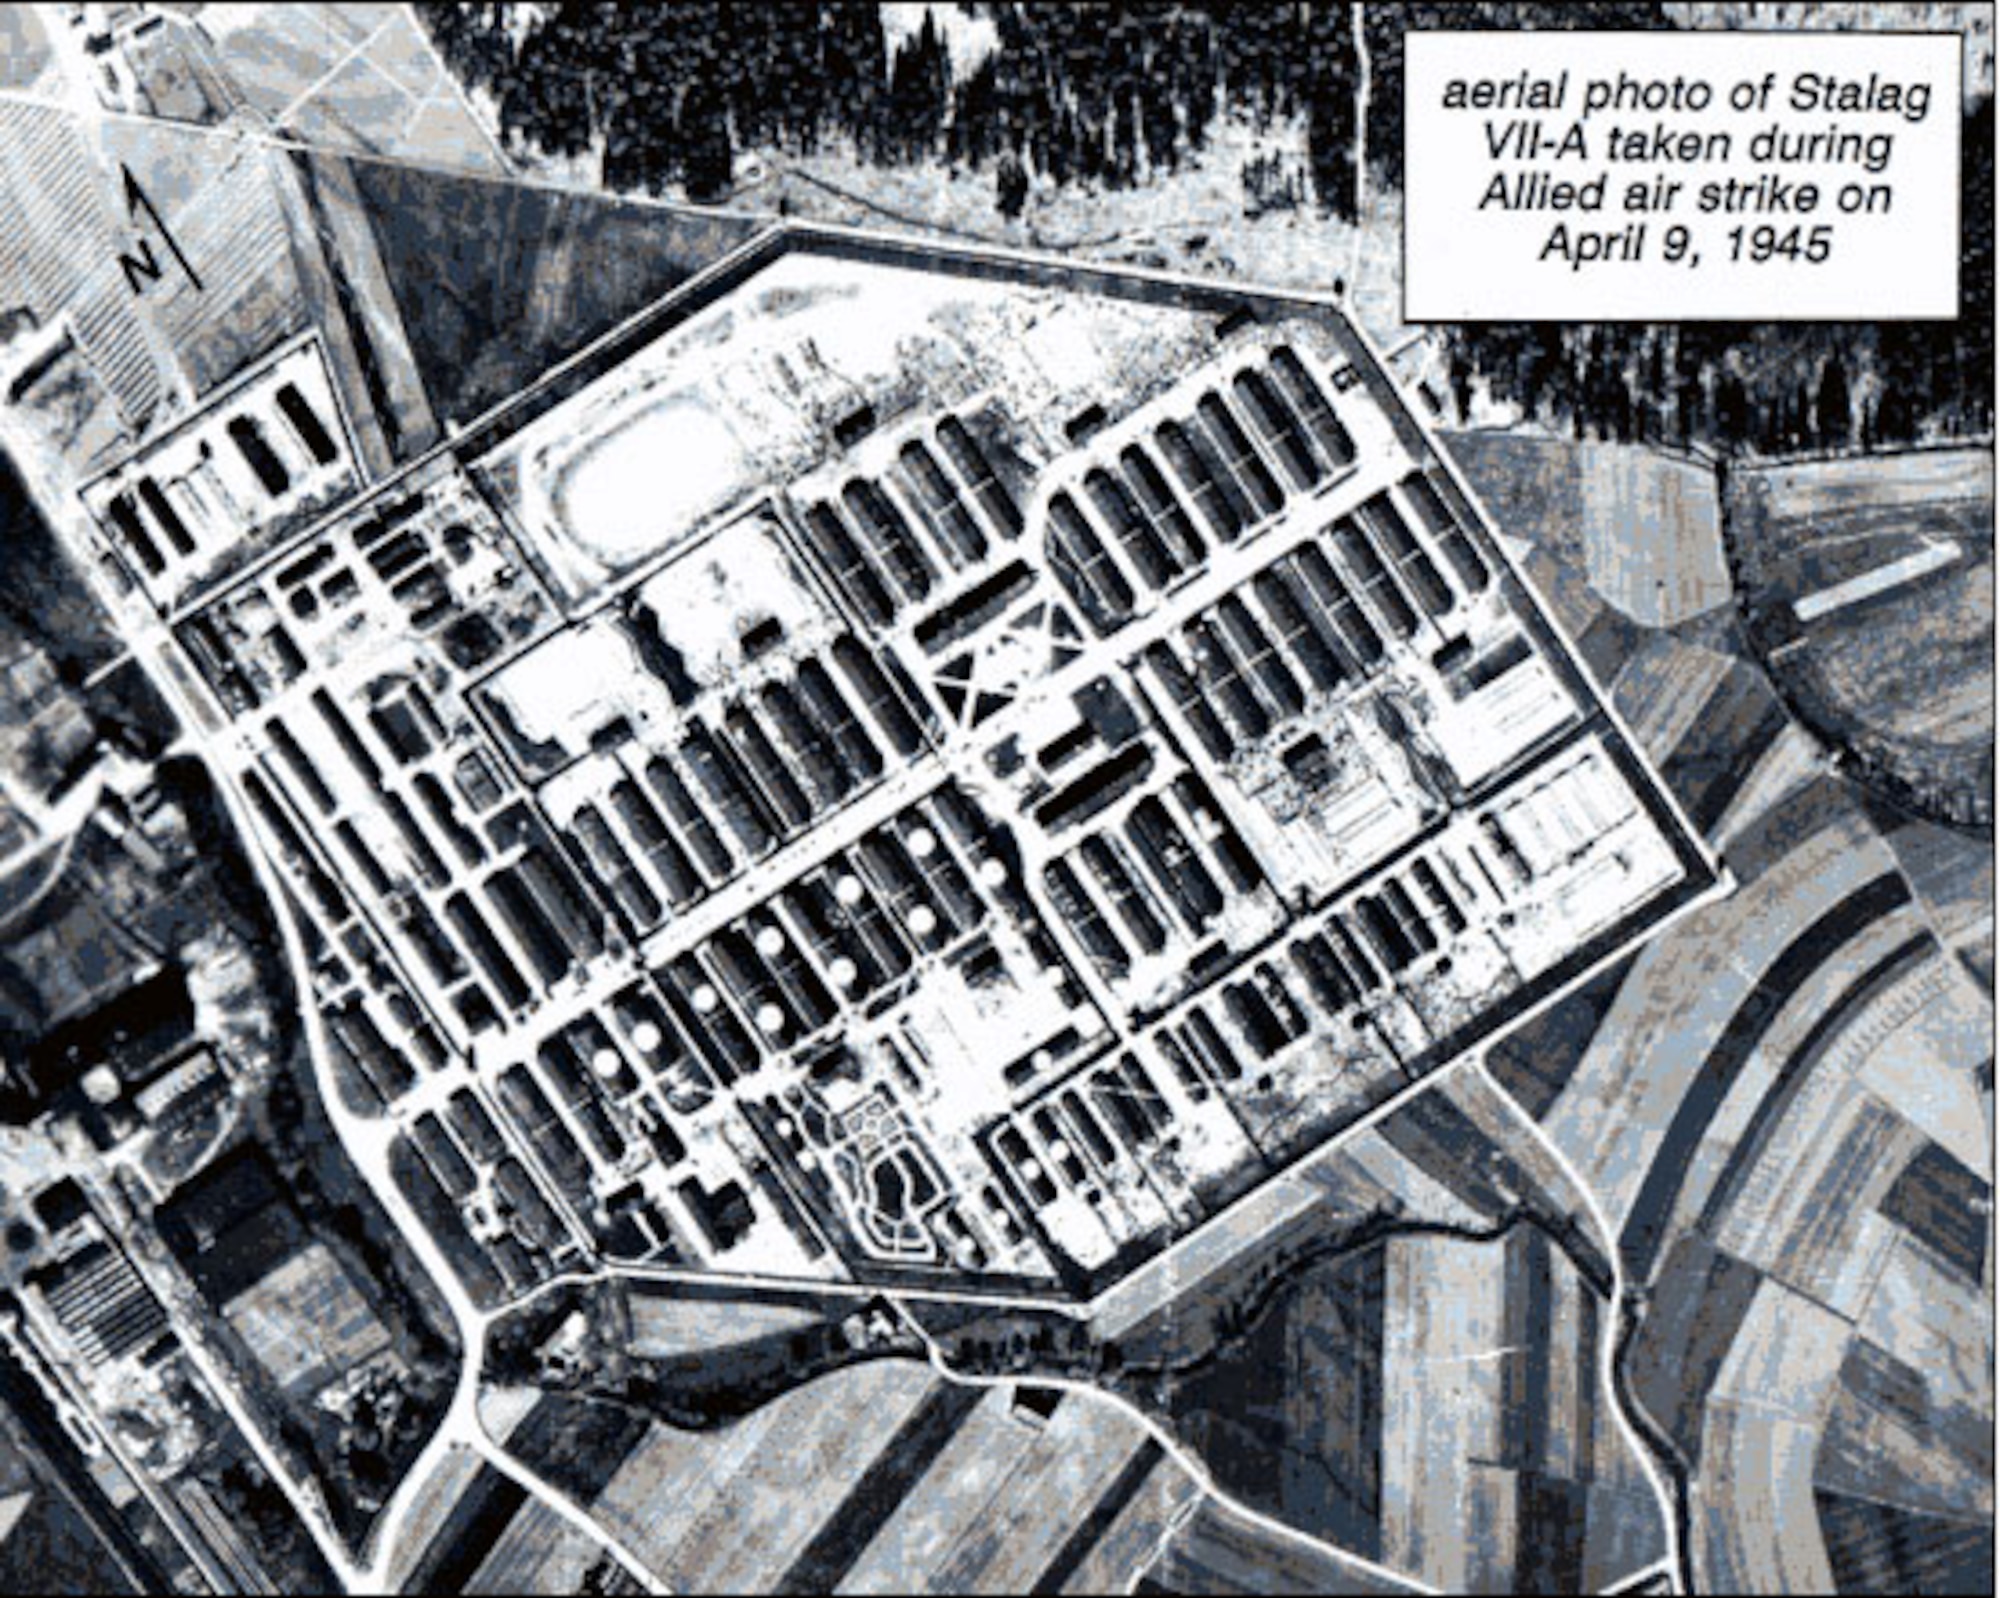 Aerial view of Stalag VII-A near Moosburg, Germany, site of the largest German POW camp in World War II. (Courtesy Moosburg Online at www.stalag.moosburg.org)